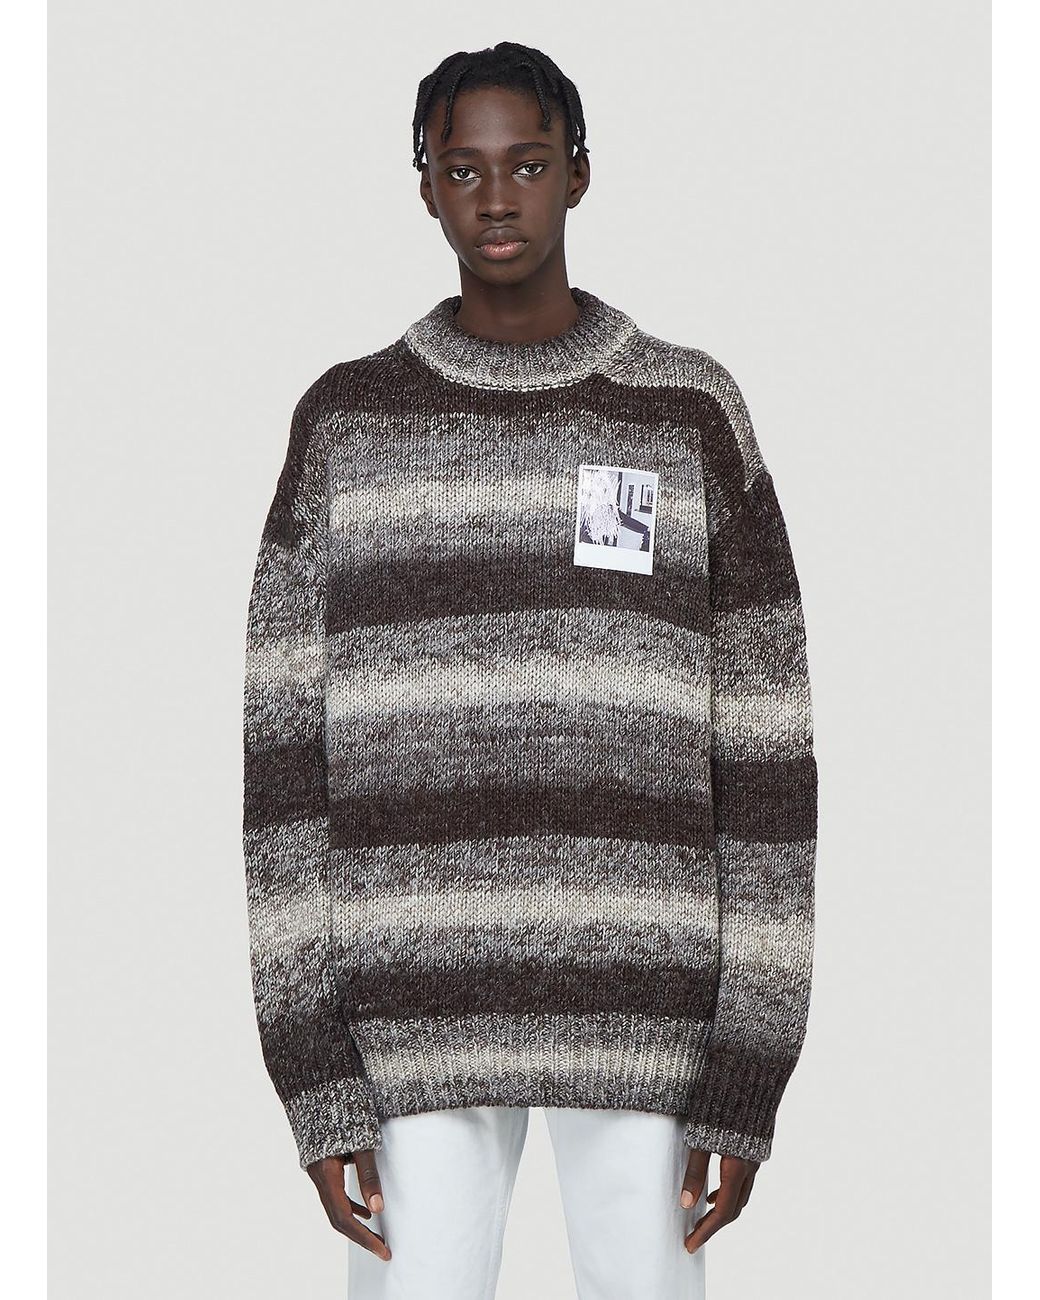 Raf Simons Oversized Striped-knit Sweater in Brown for Men - Lyst